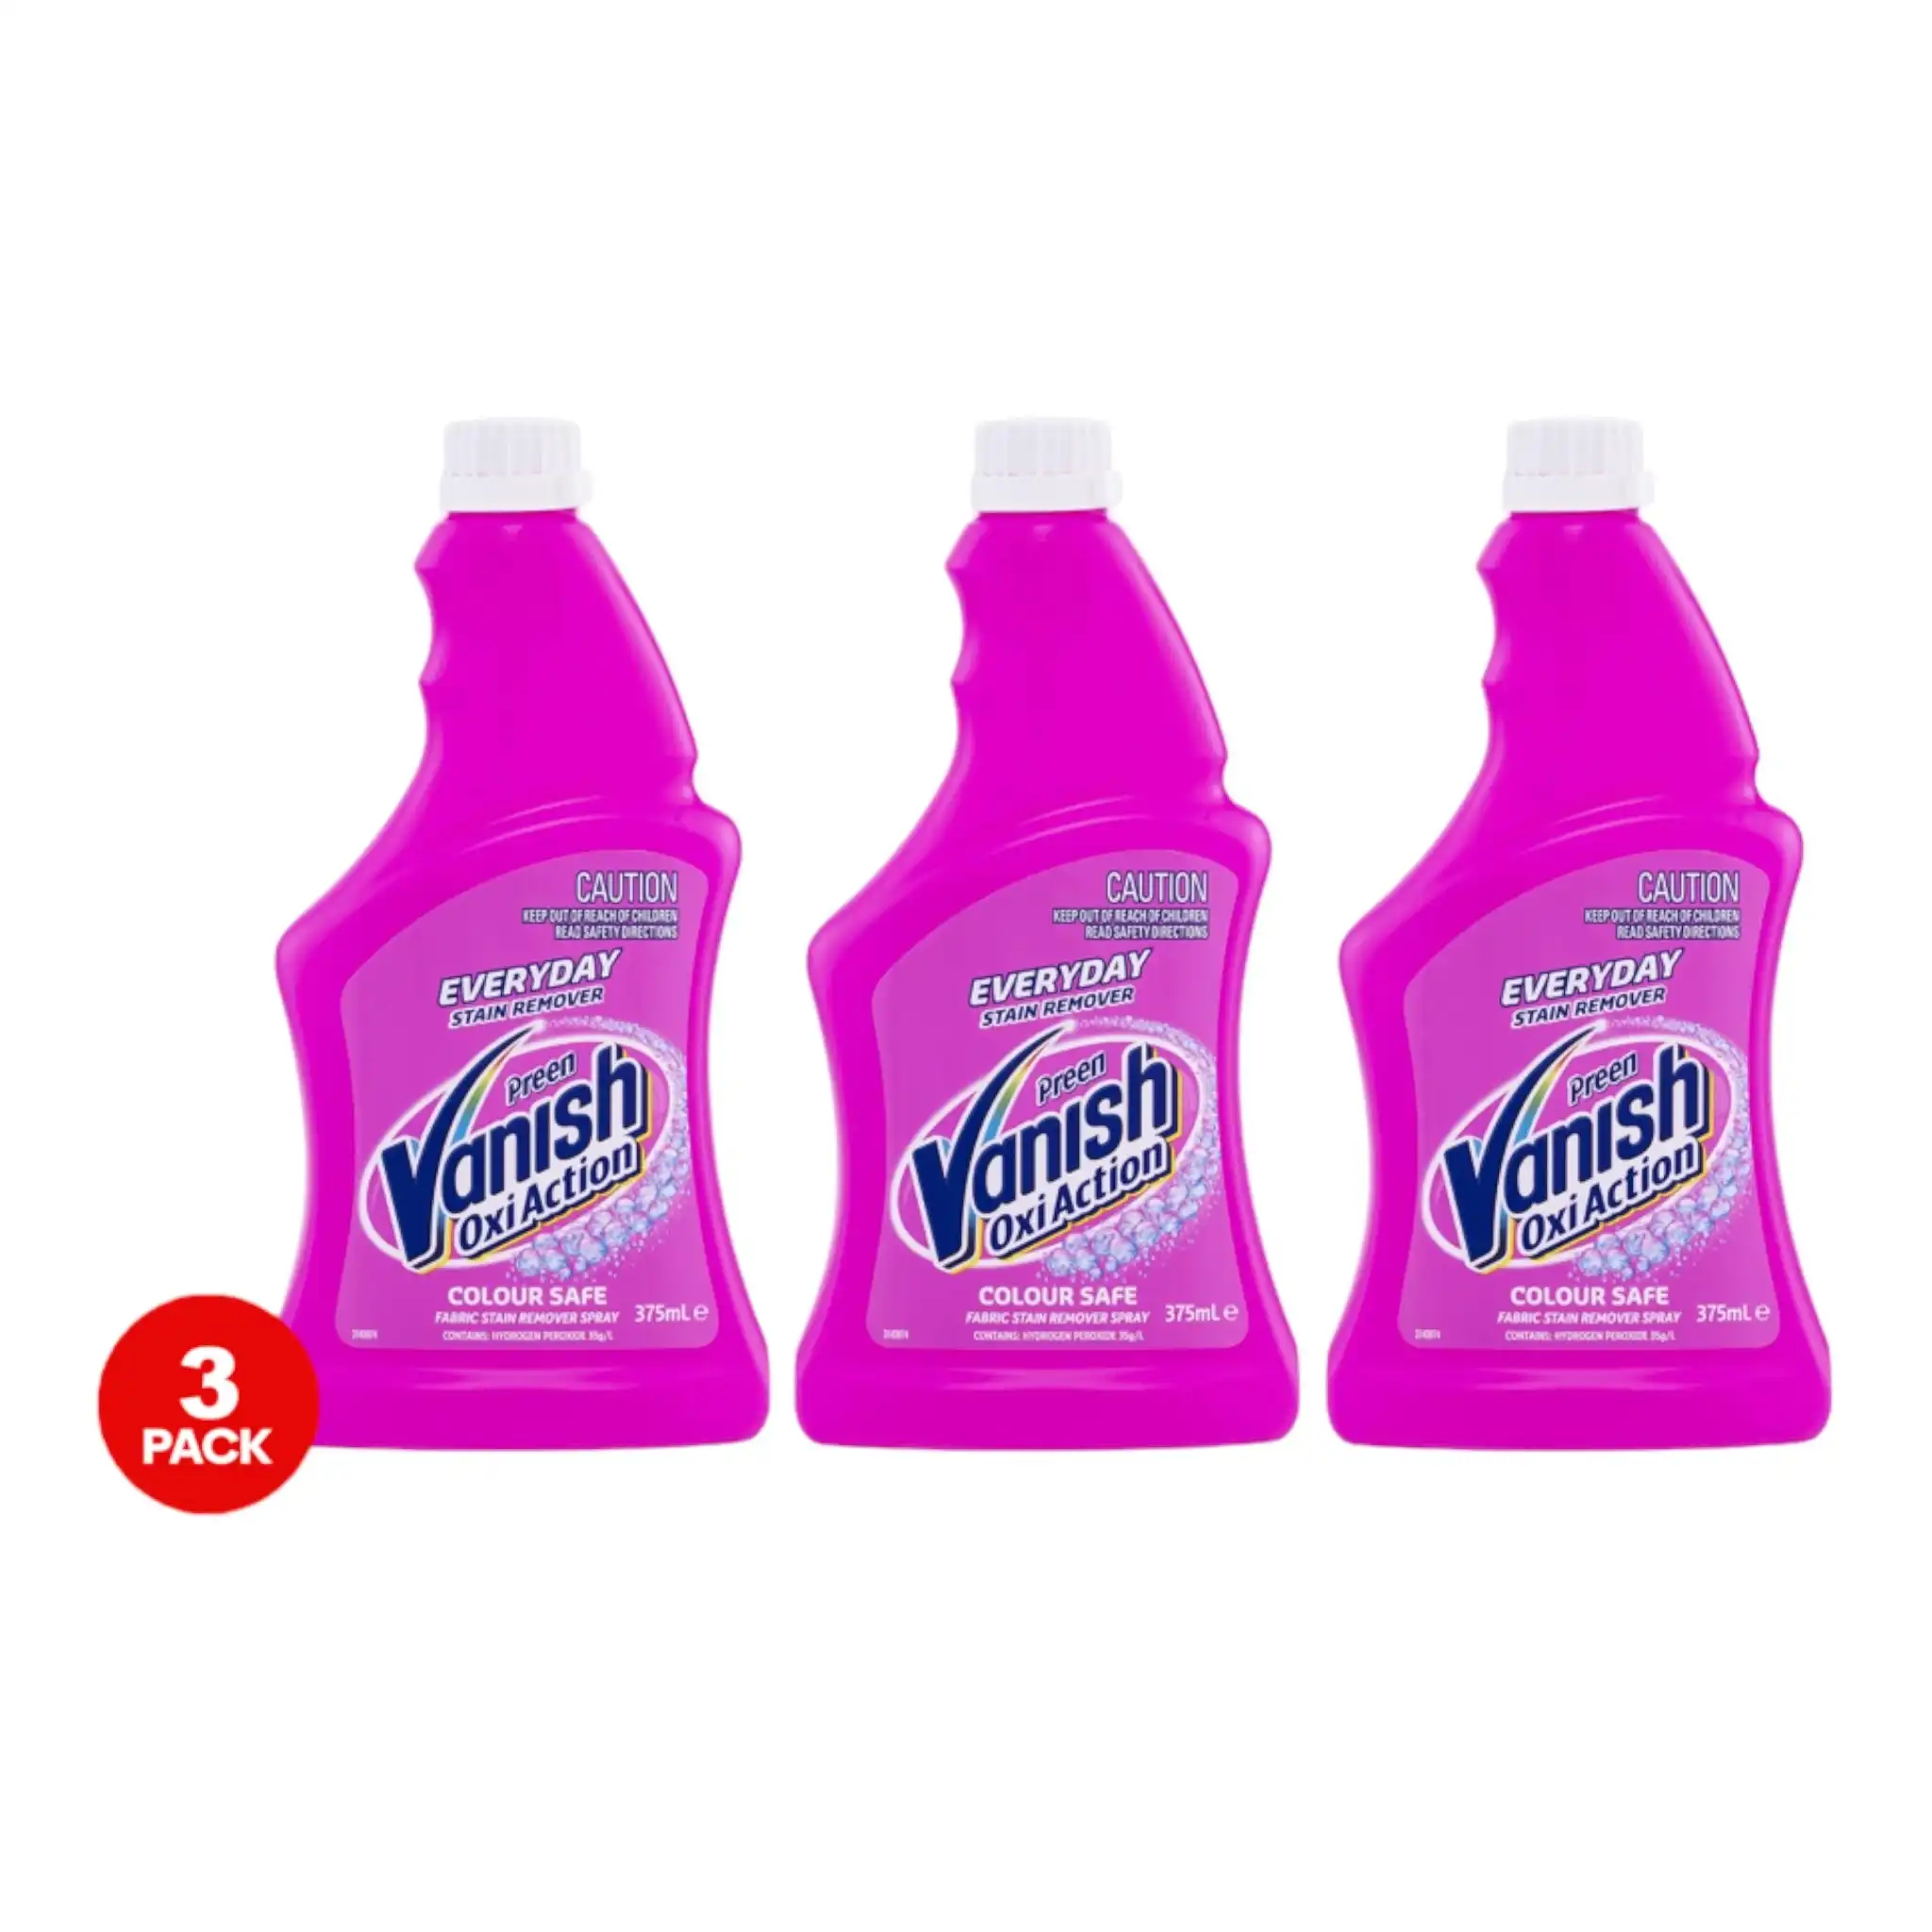 3 Pack Vanish Preen OxiAction Everyday Stain Remover Refill 375mL